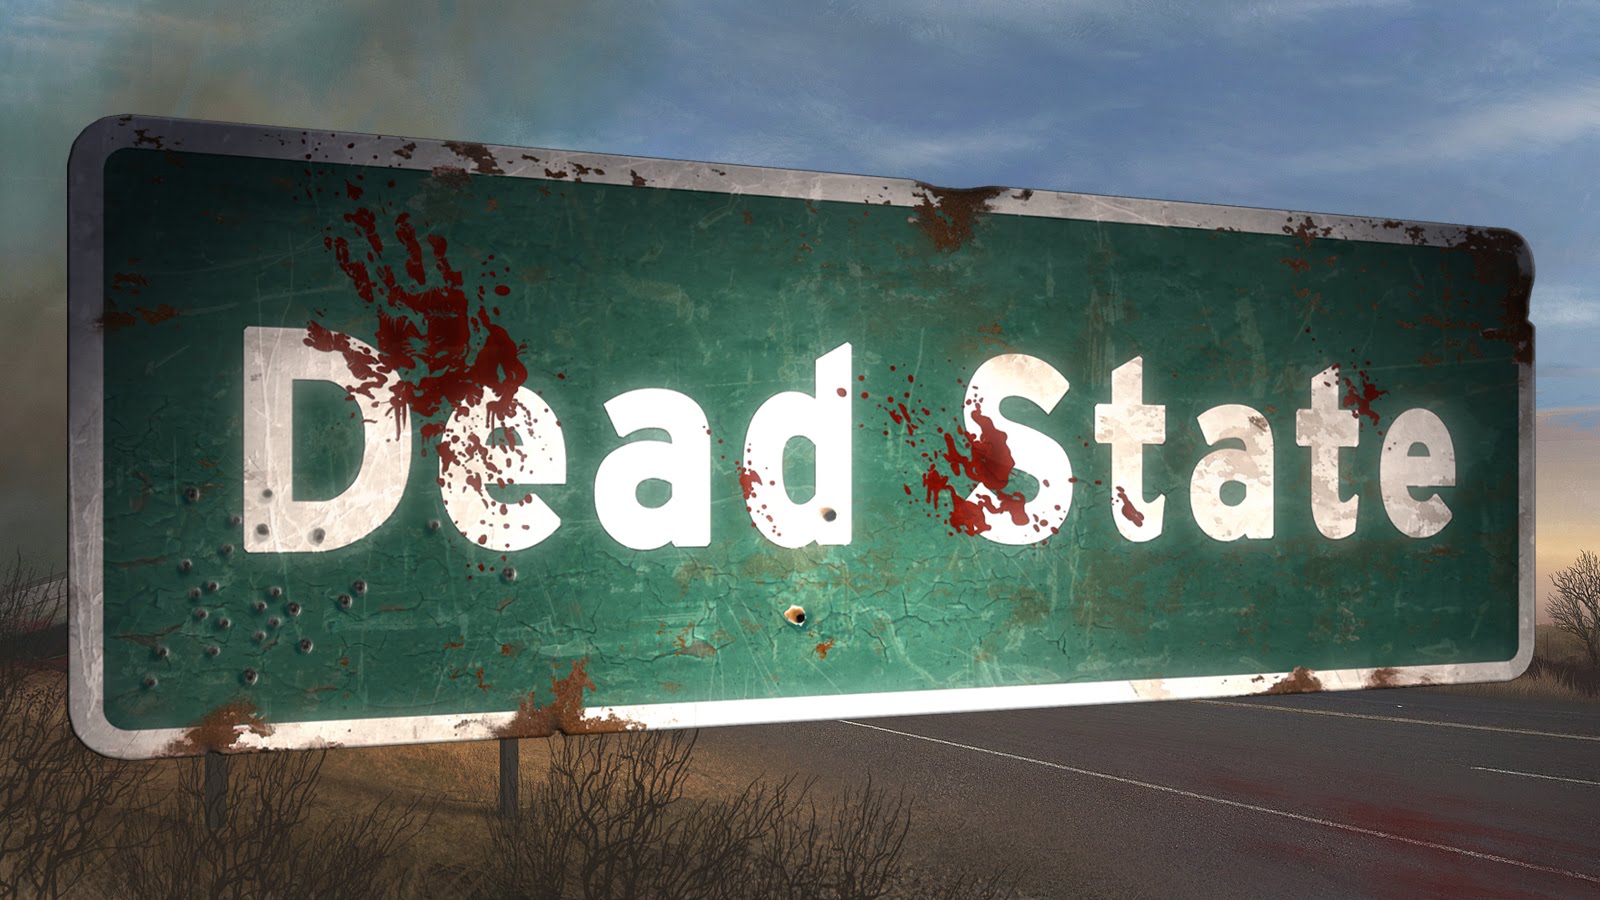 Dead state reanimated